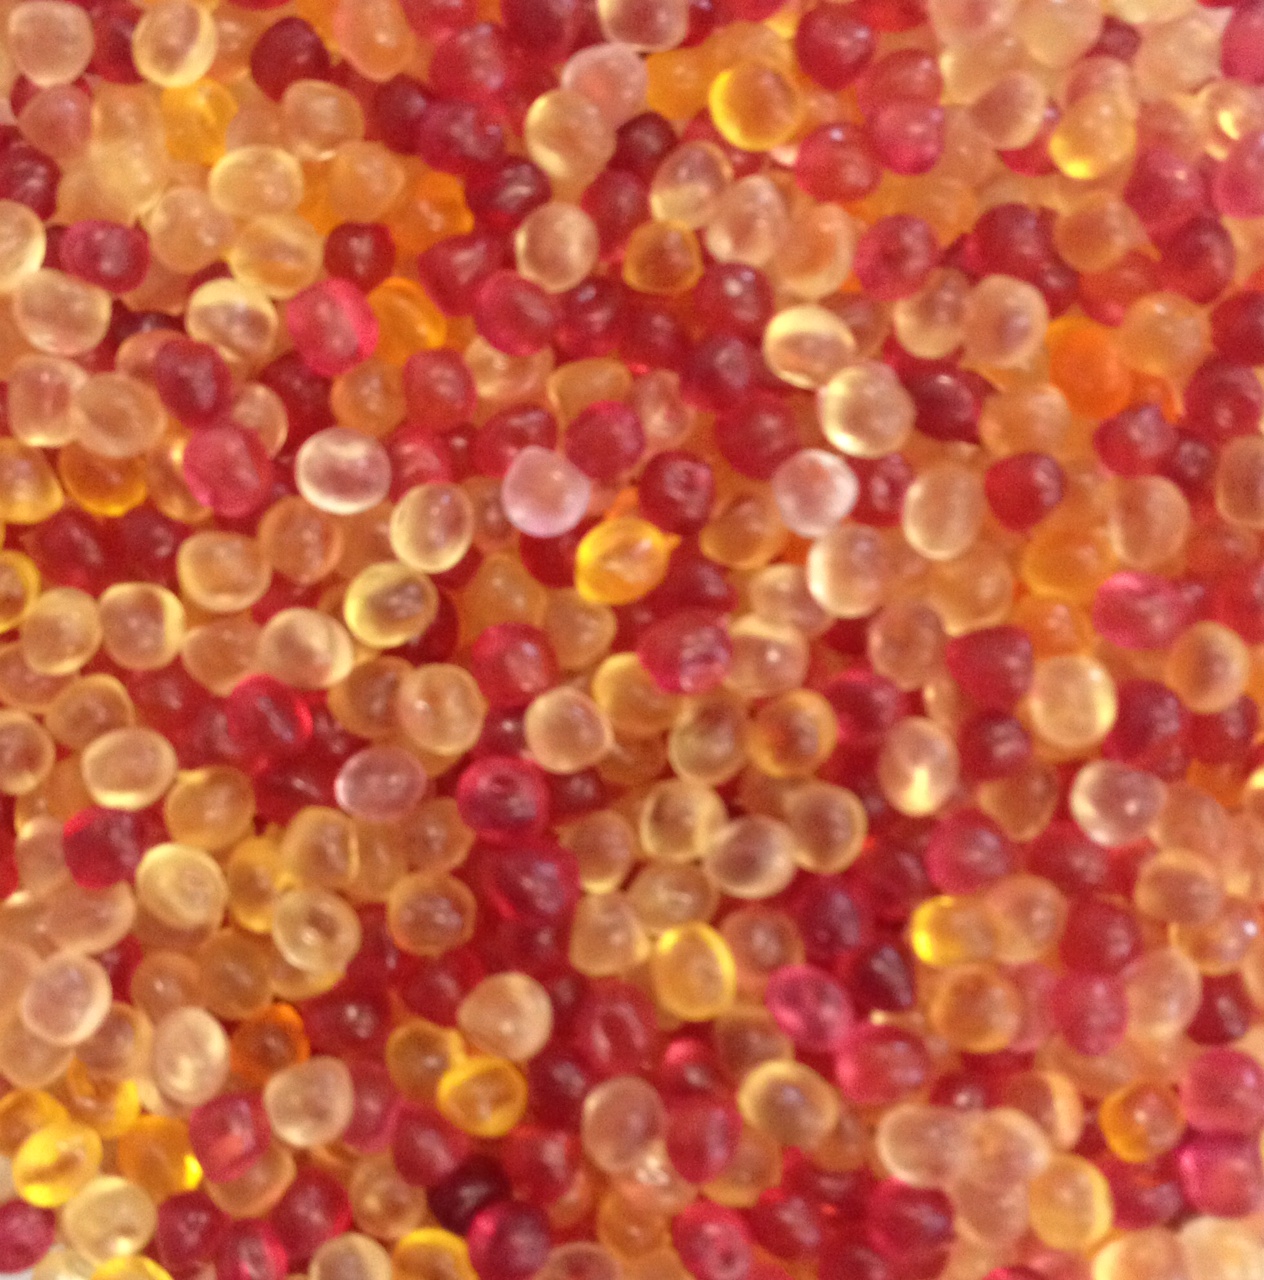 Scented Aroma Beads 10 lb. Mixed Variety [AB10LBMIX] - $142.49 : Aroma Beads, Fragrance Oil